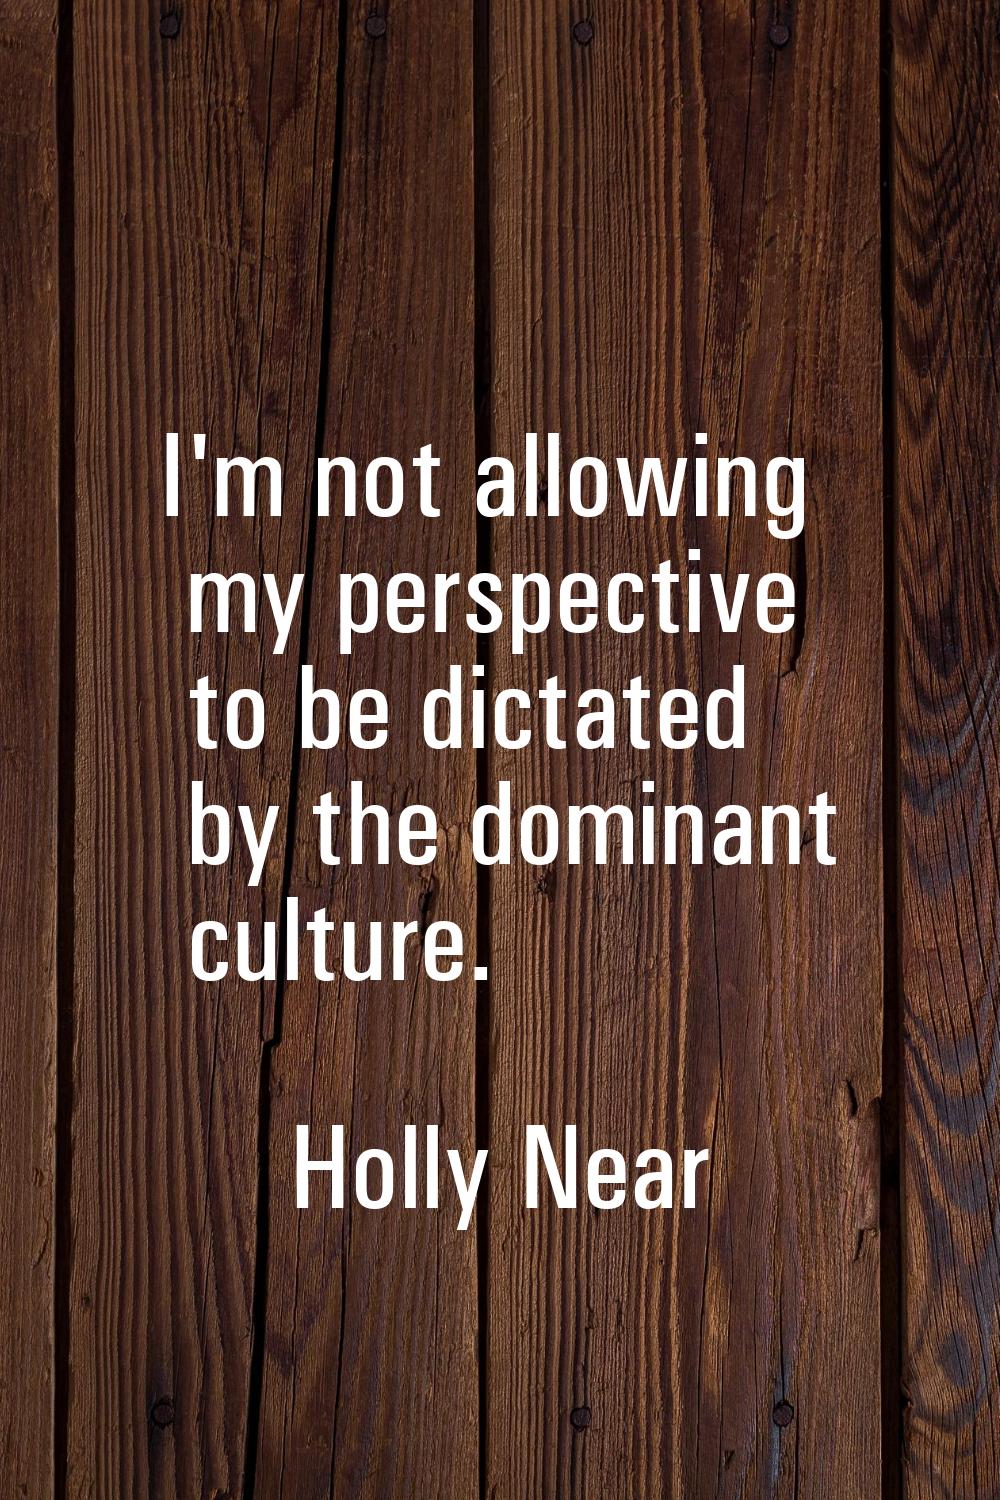 I'm not allowing my perspective to be dictated by the dominant culture.